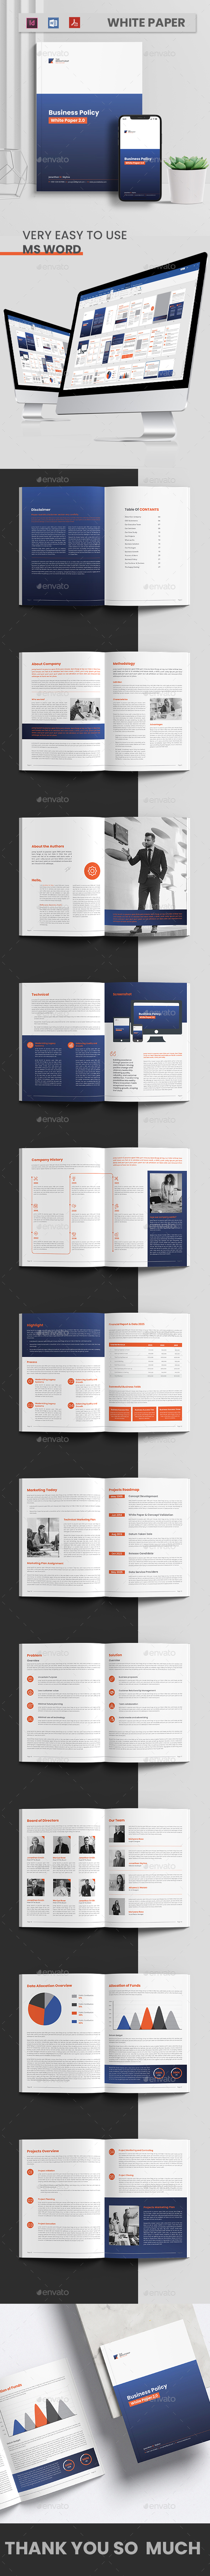 White Paper | Indesign & Ms Word